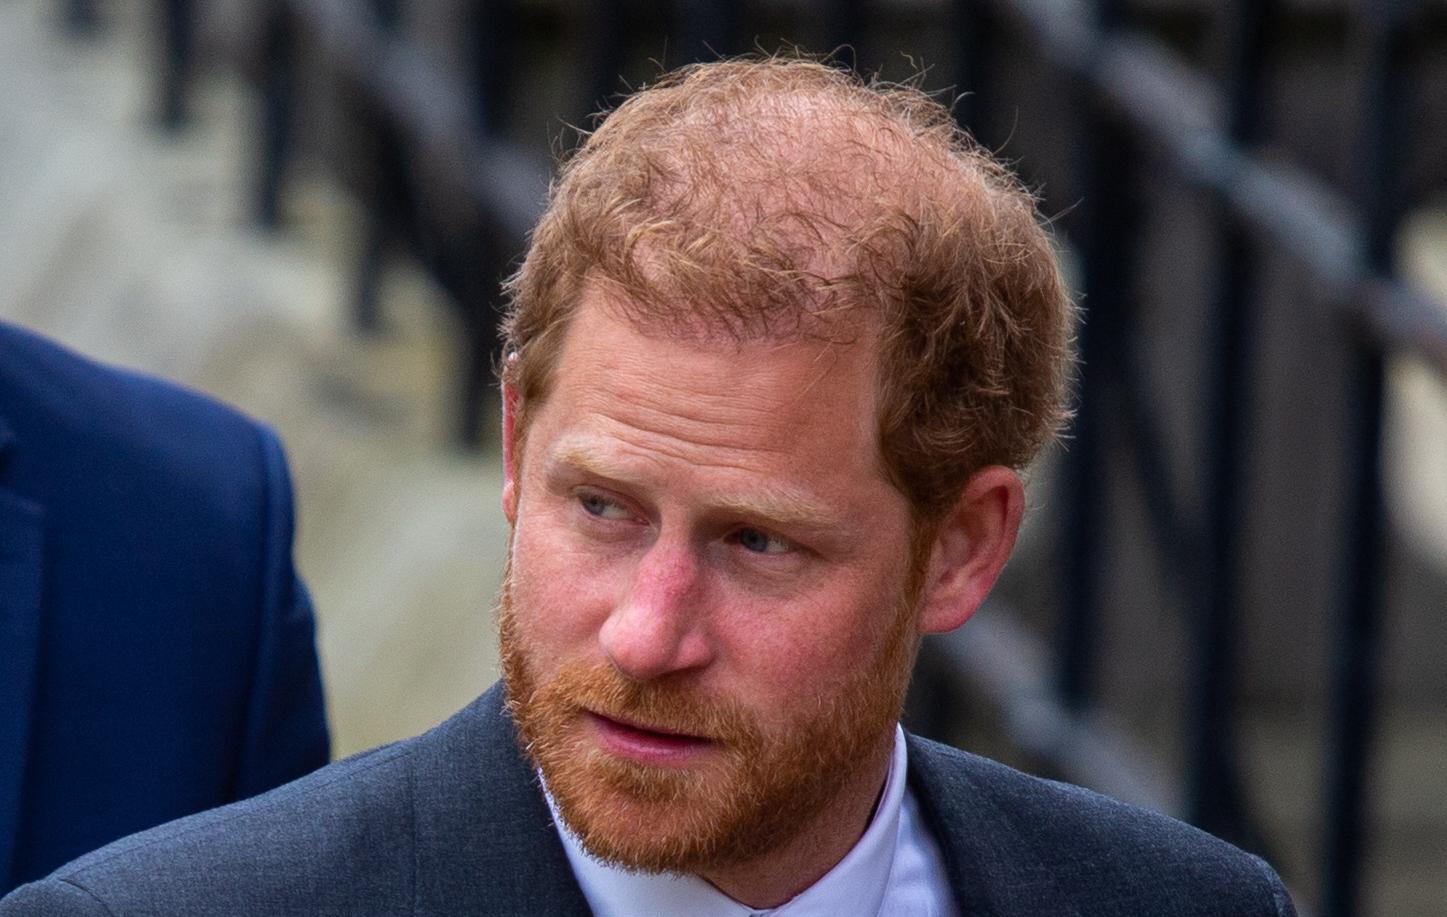 Prince Harry arrives at High Court for the final day